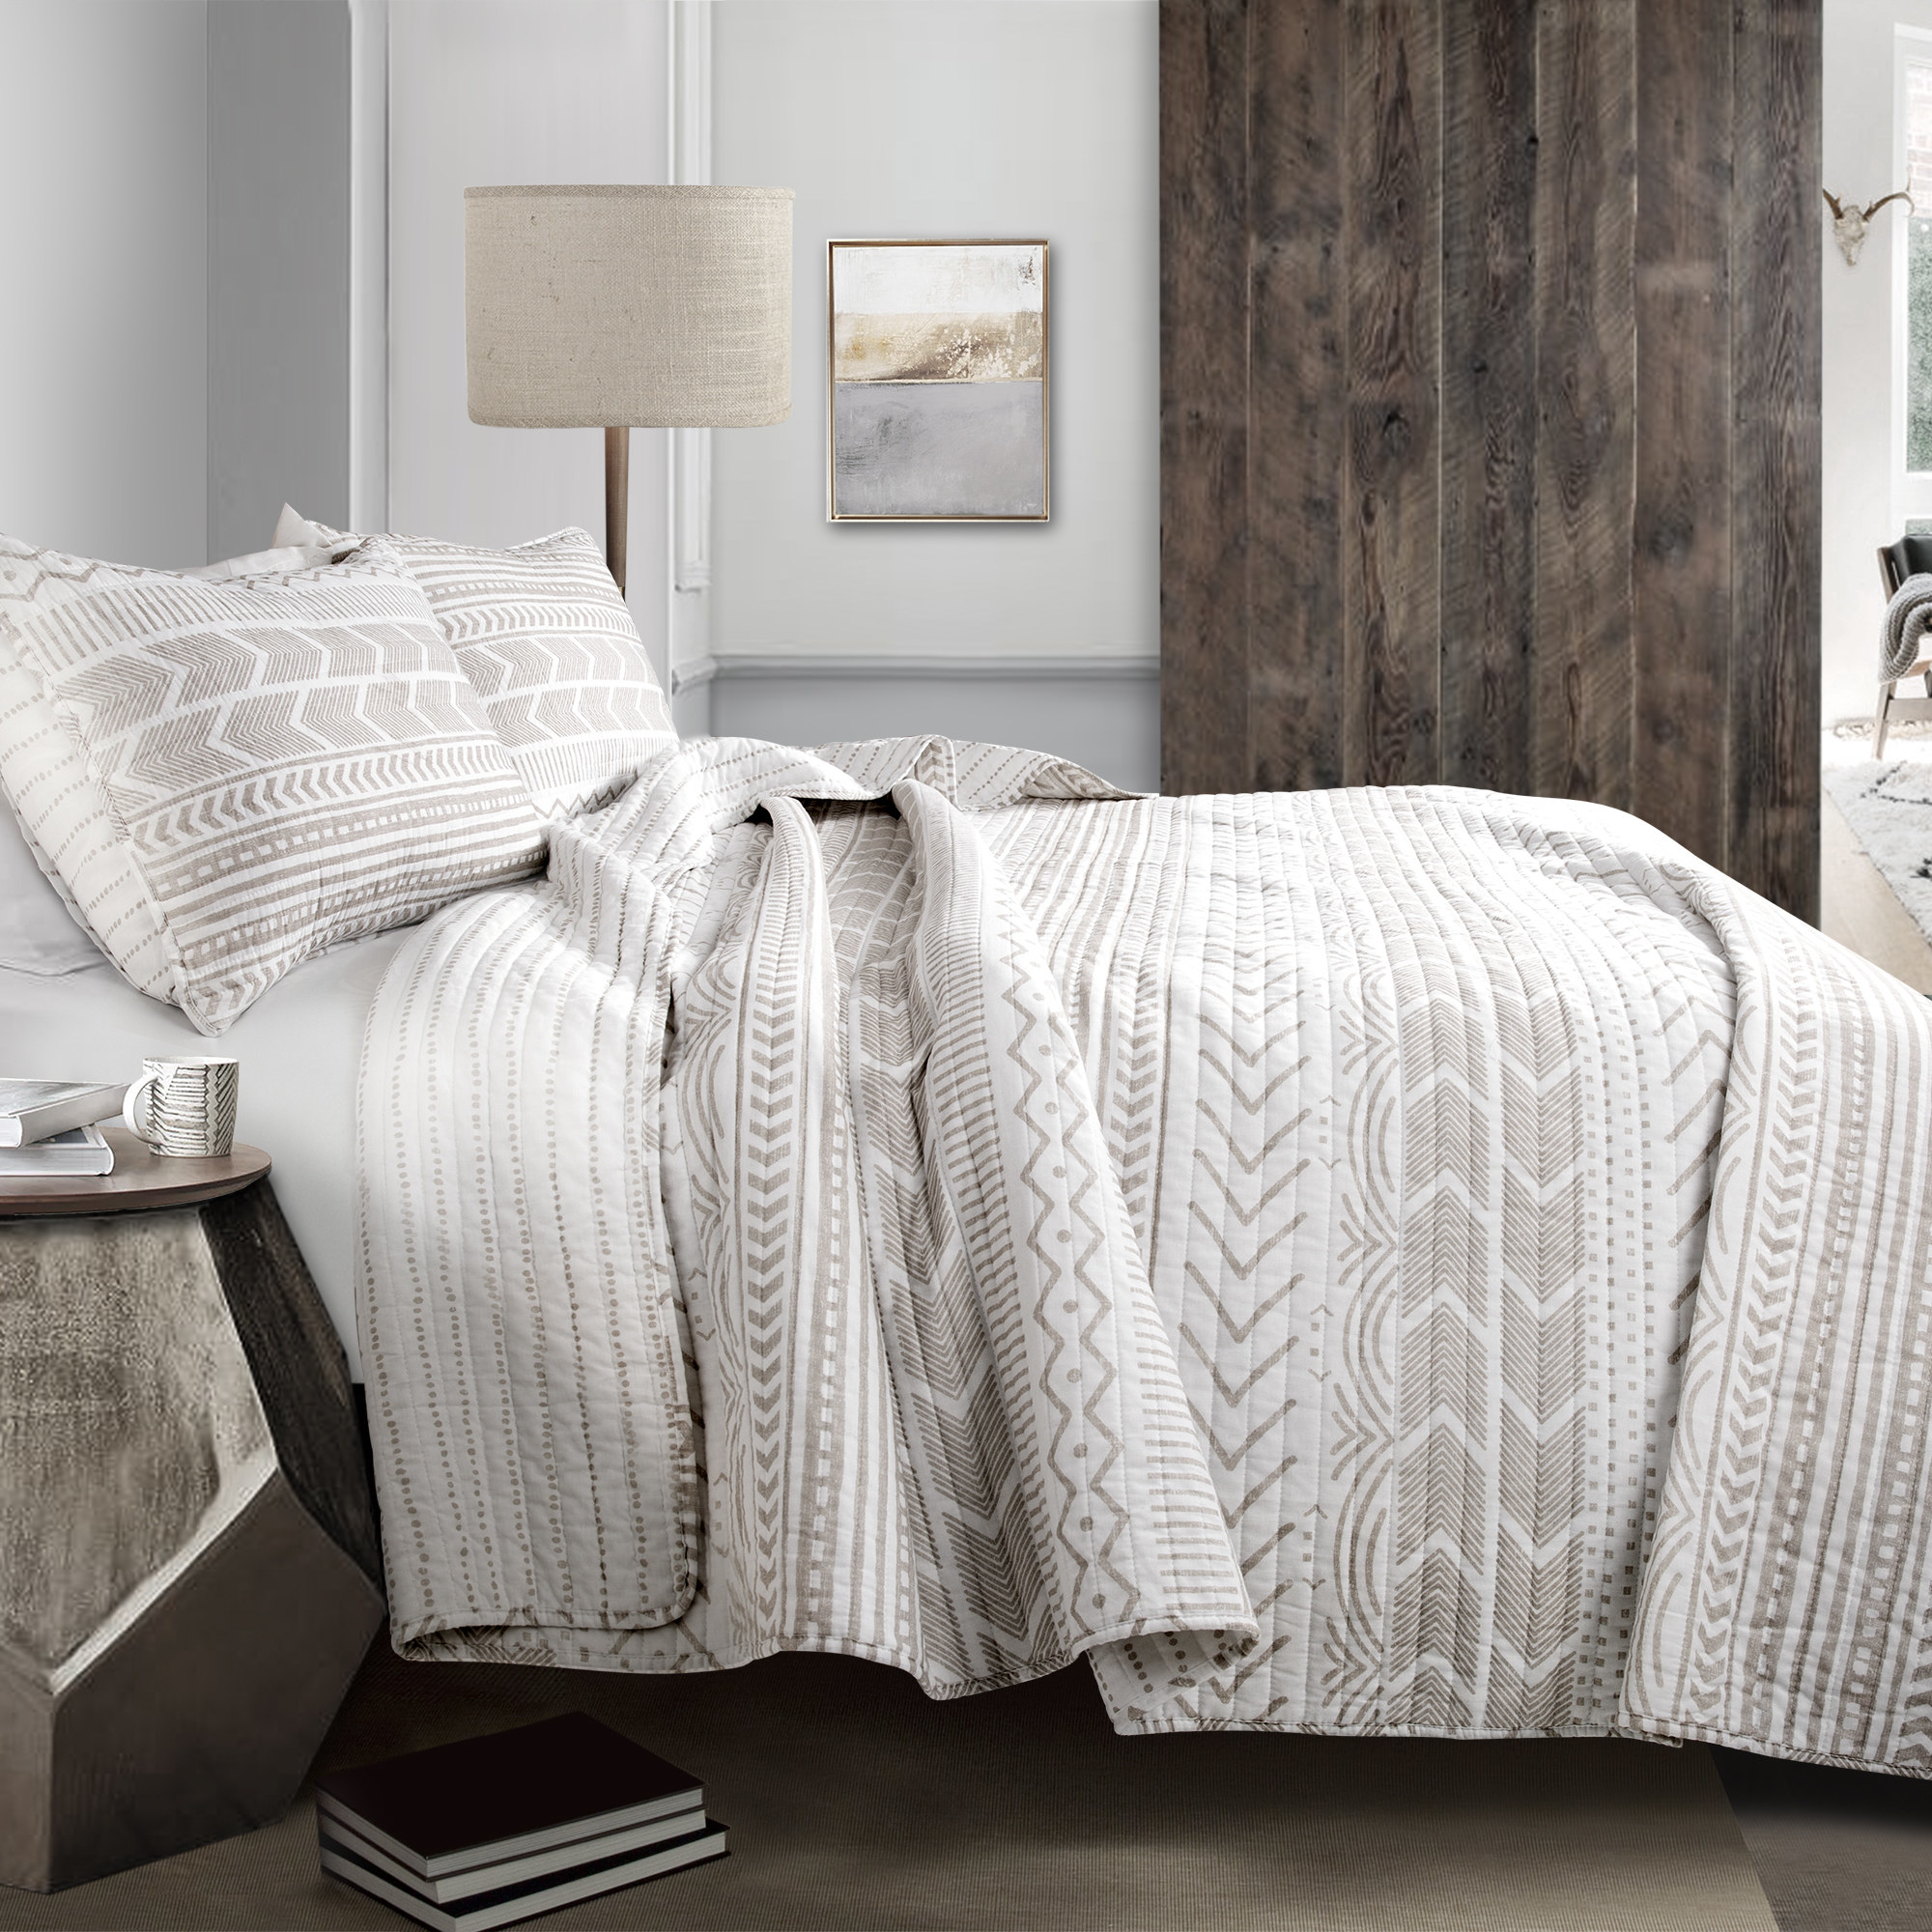 the white and grey patterned comforter on a bed